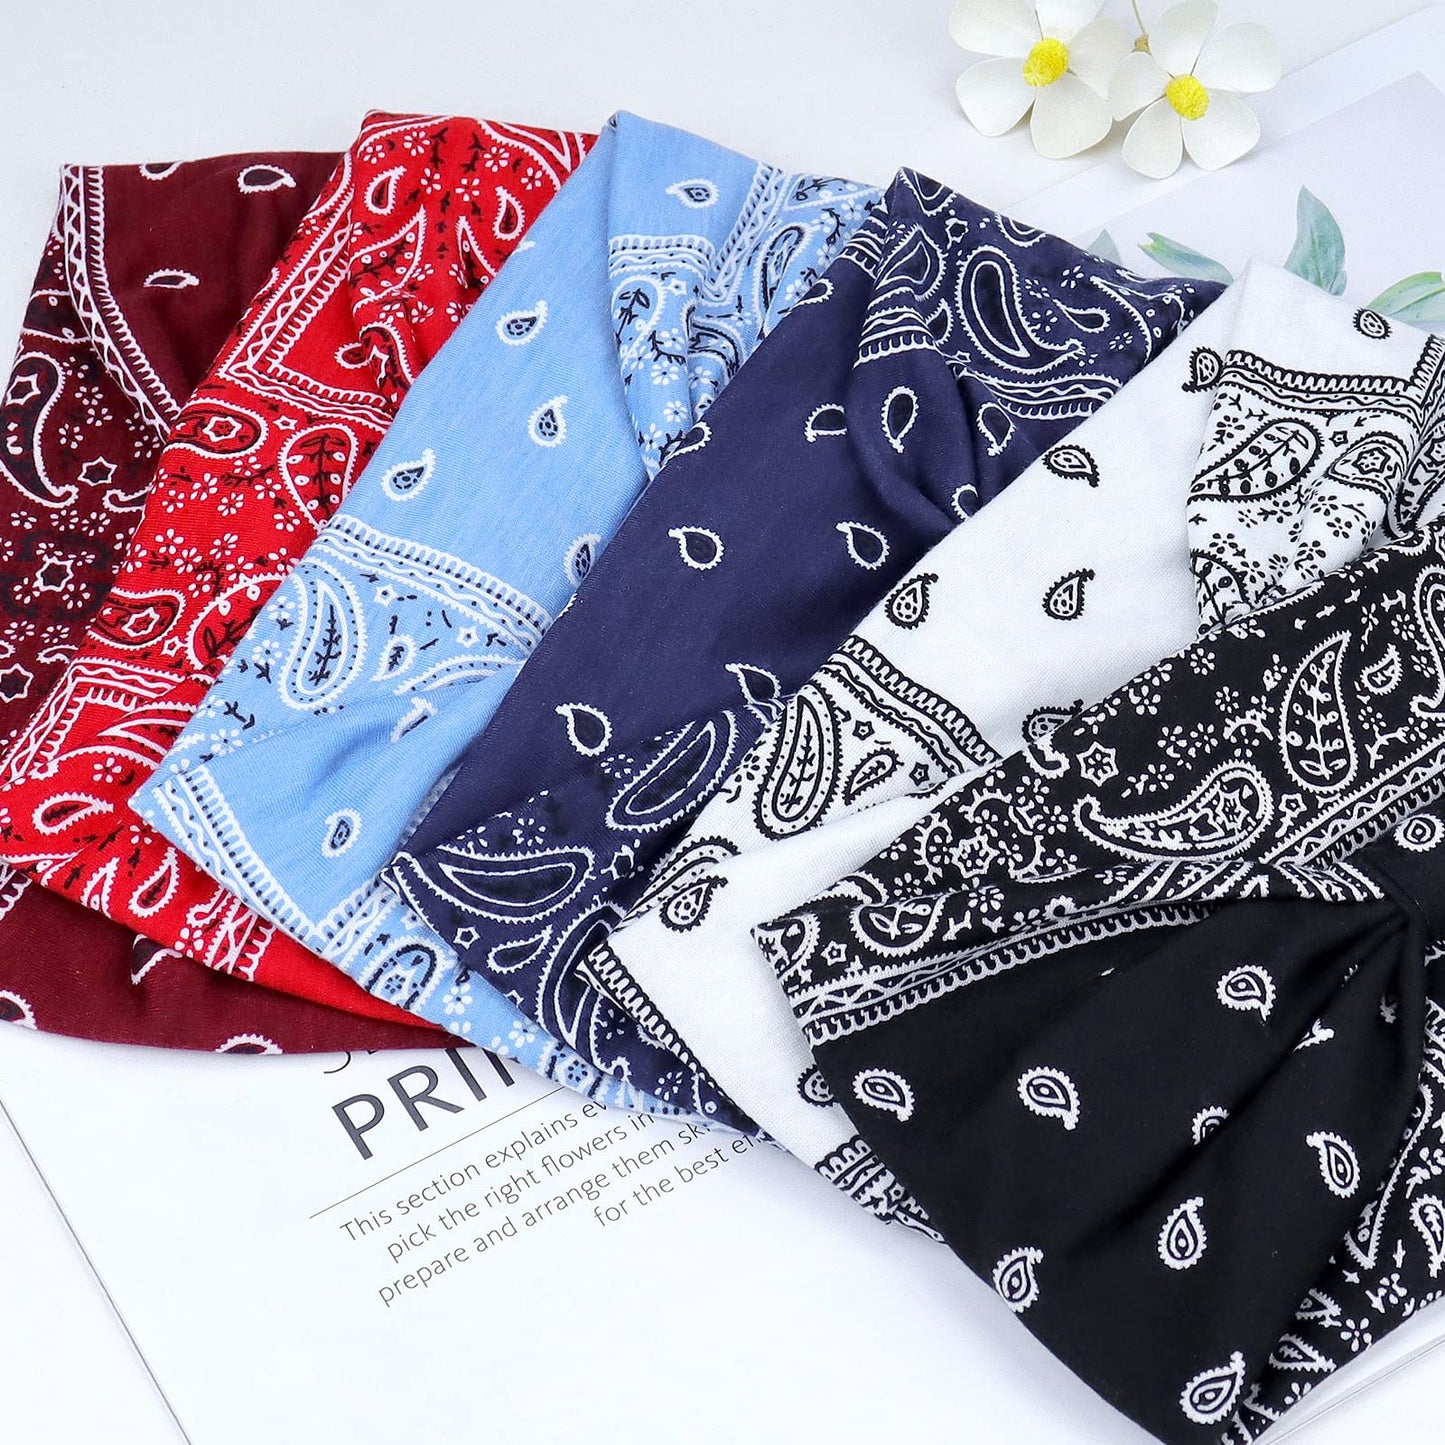 AWUMBUK Wide Headbands for Women Knotted No Slip Head Bands Soft Turban Headband Hair Accessories Boho African Solid Color Head Wraps for Women Yoga Workout Pack of 6(Boho)